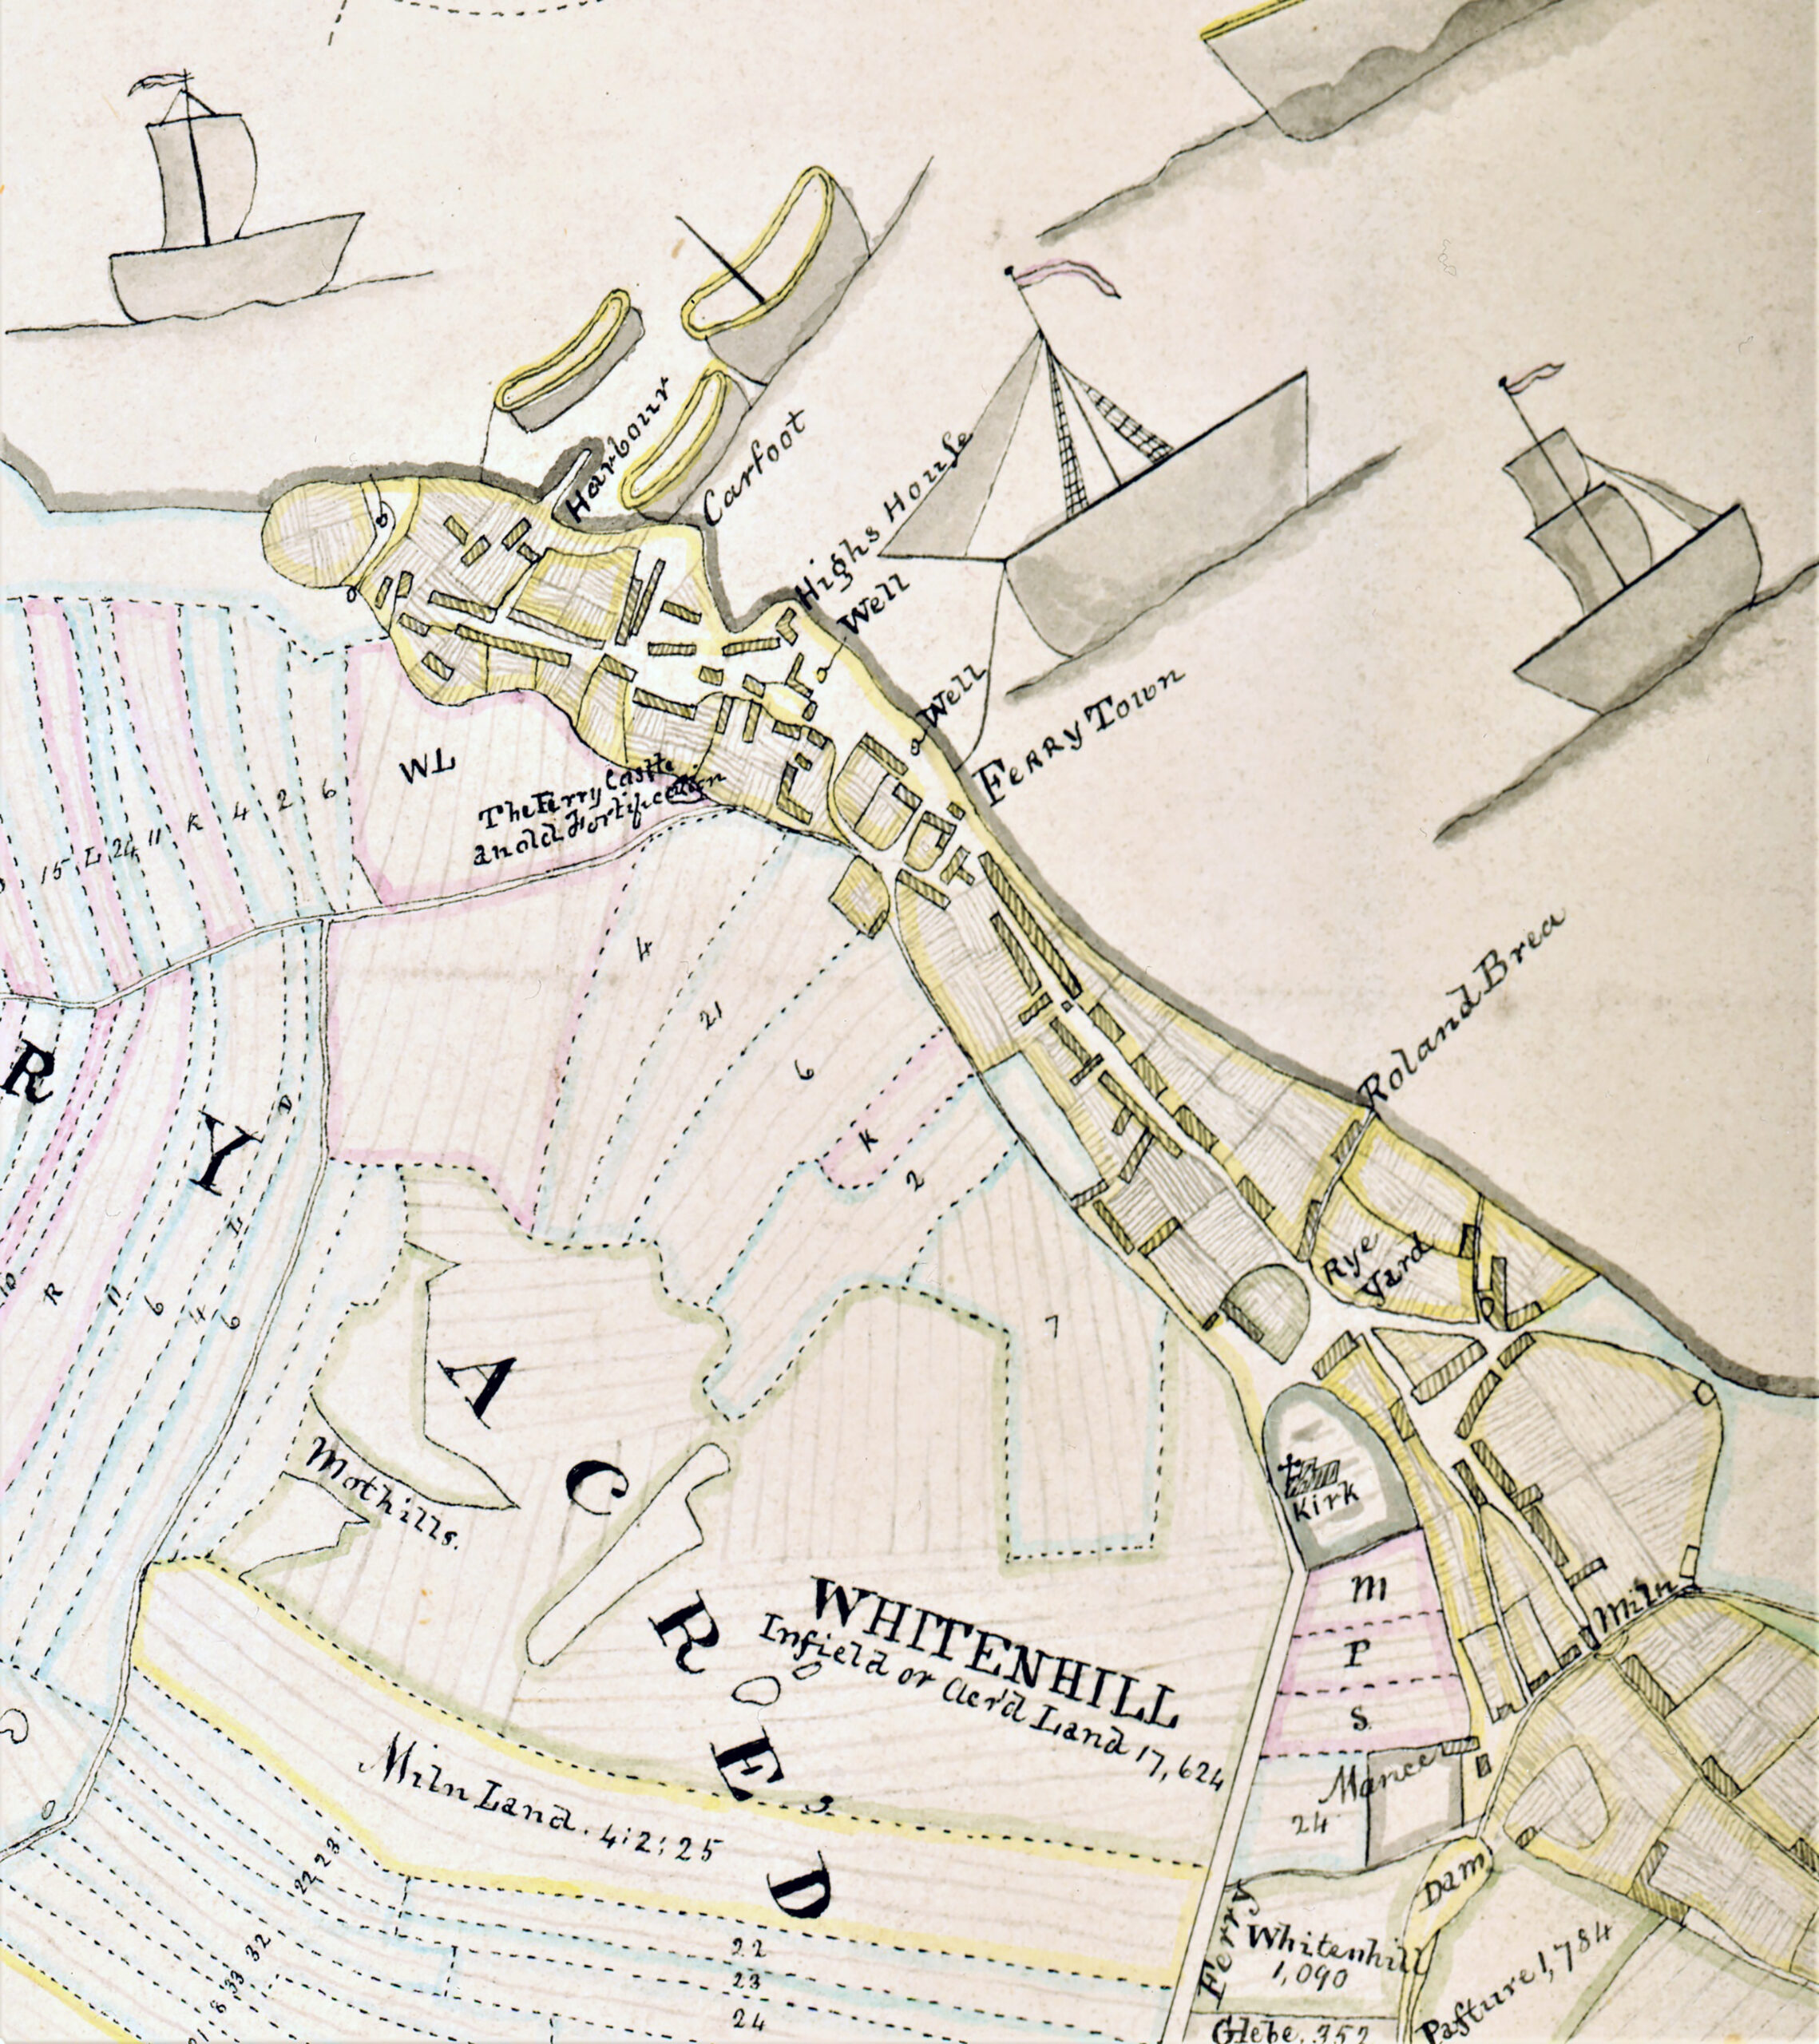 Tayport Heritage Trail - Board 2 - Extract from J Hope 1769 map